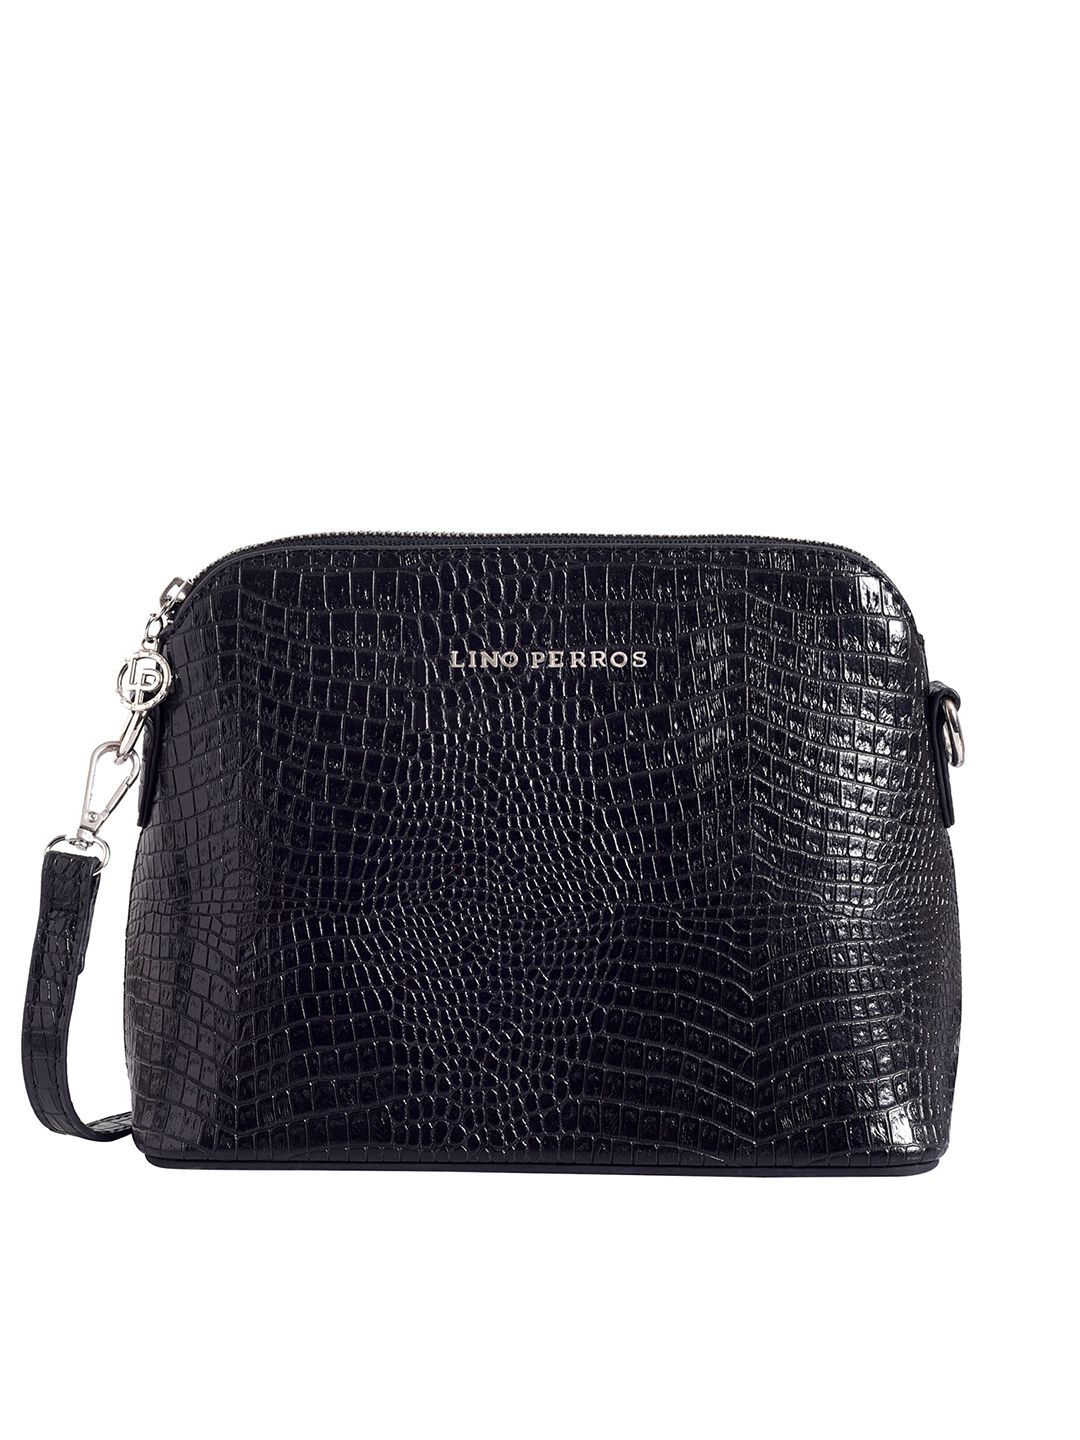 Lino Perros Women Black Croc-Textured Structured Sling Bag Price in India